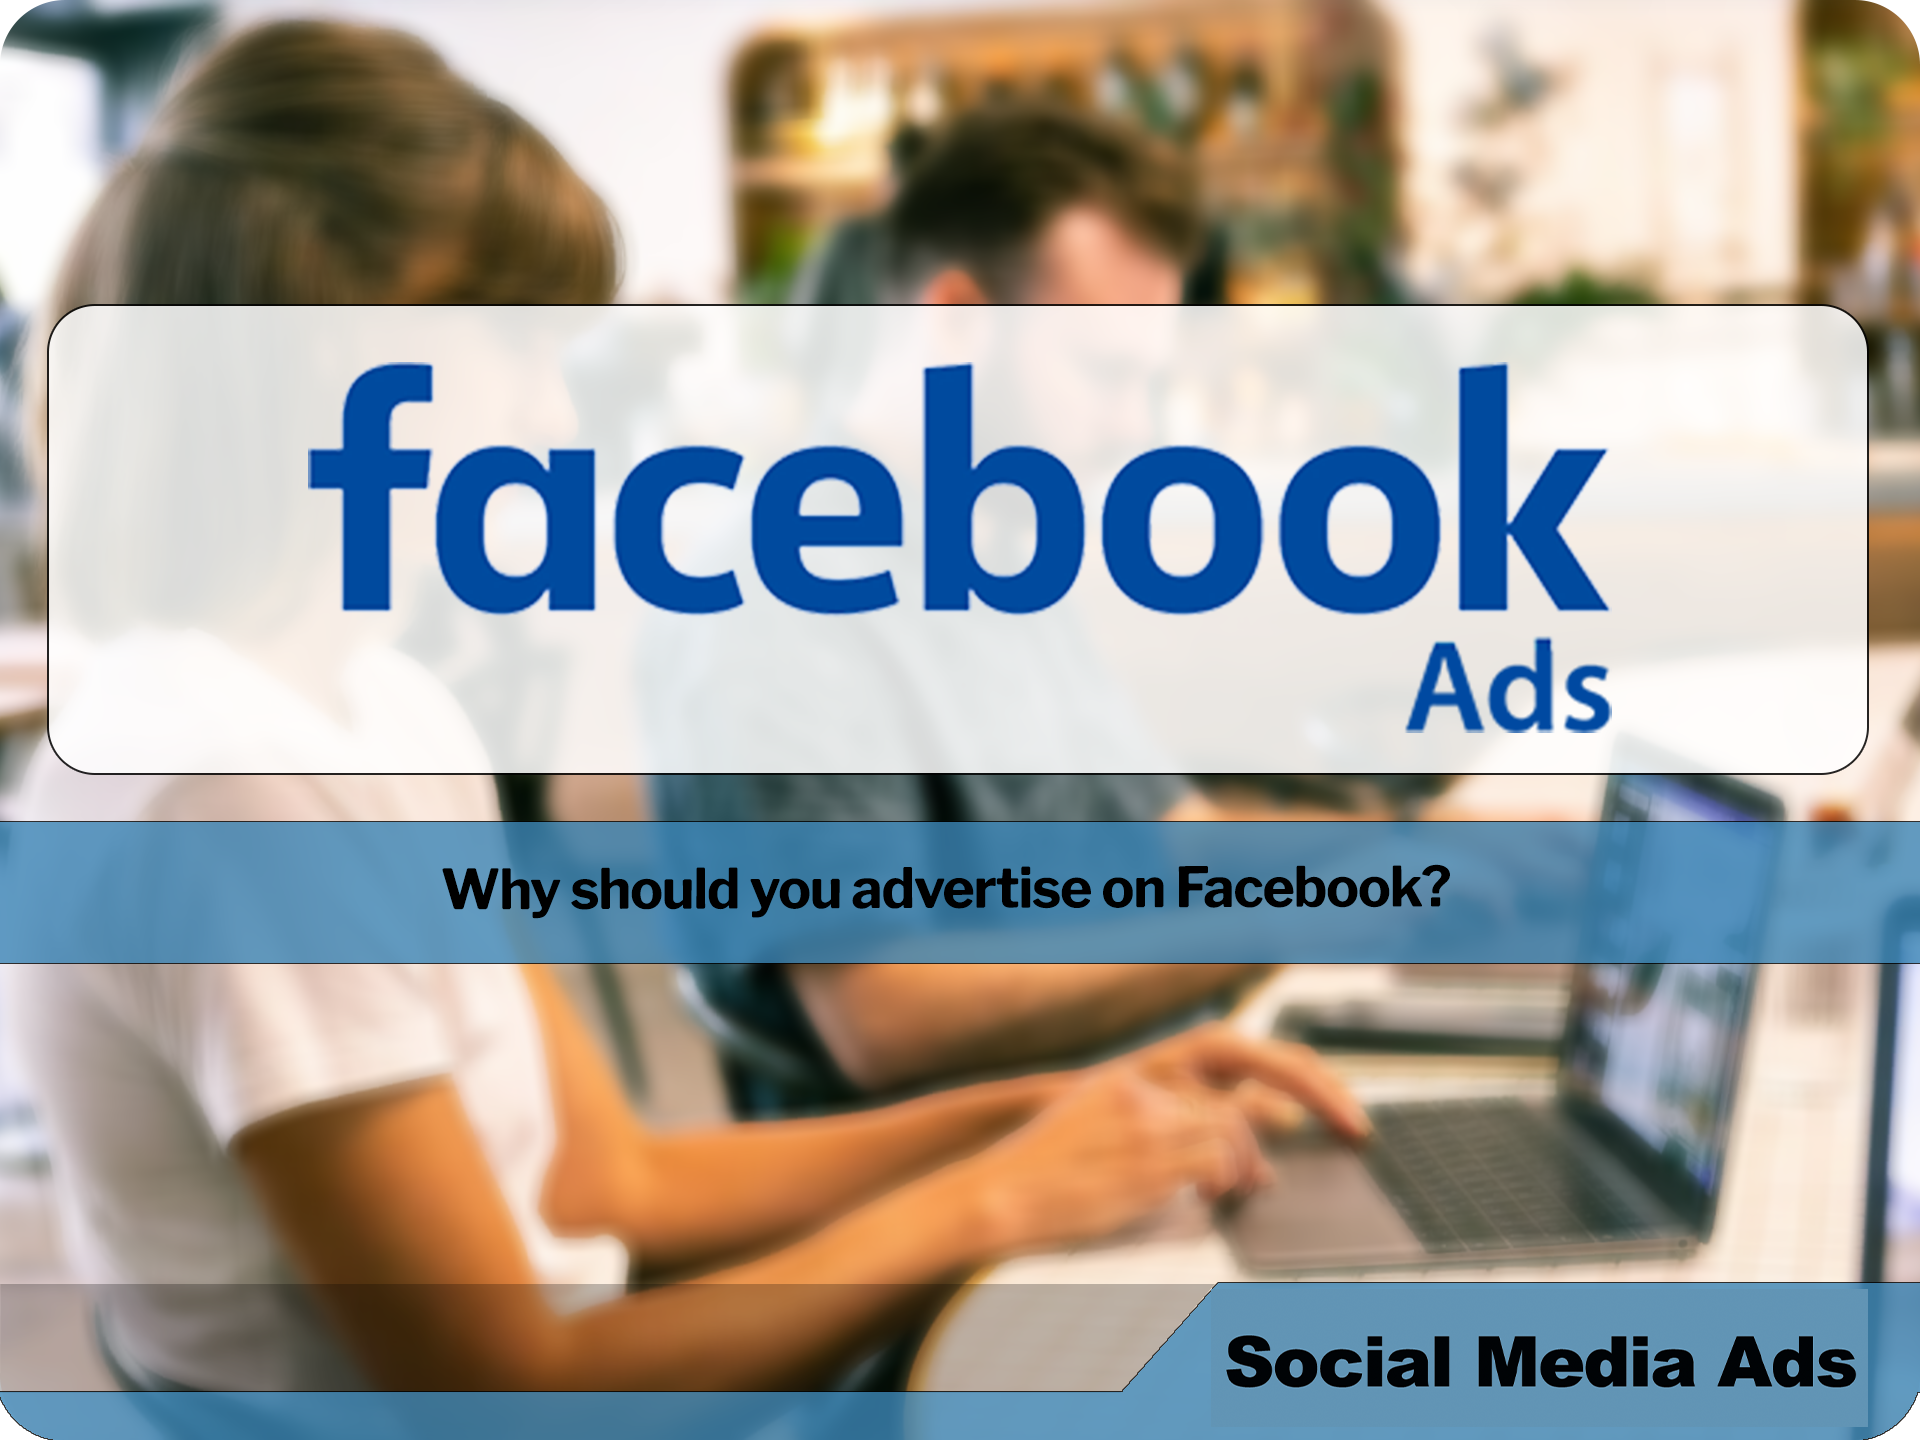 Why advertising on Facebook is a reasonable choice